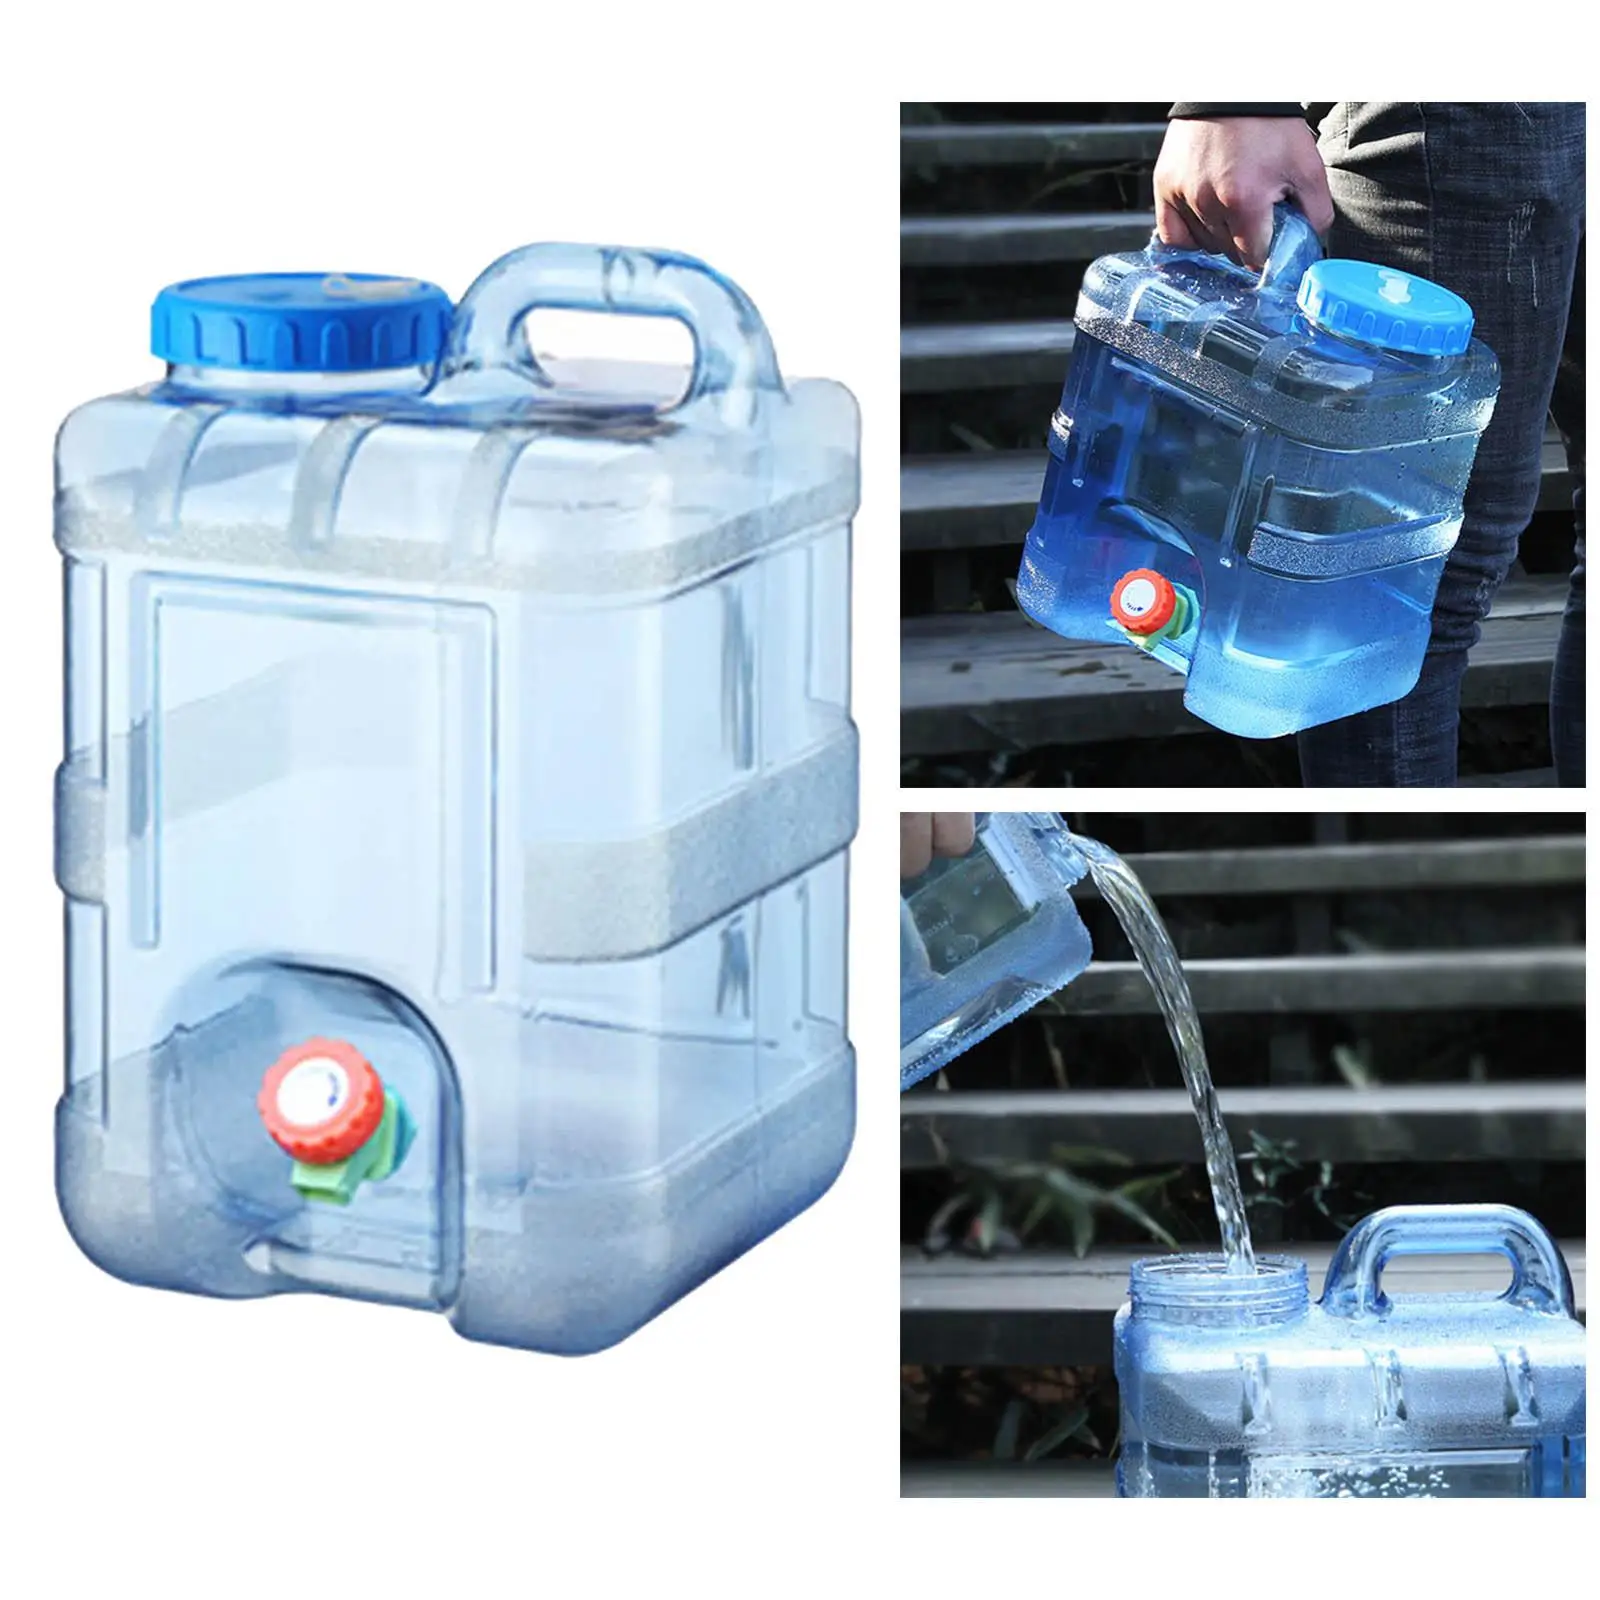 https://ae01.alicdn.com/kf/S5973372fe4ba4dbe87e2cffda707c7e0Z/4-Gallon-Camping-Water-Storage-Jug-Water-Carrier-Water-Canteen-with-Tap-Water-Container-for-Car.jpg